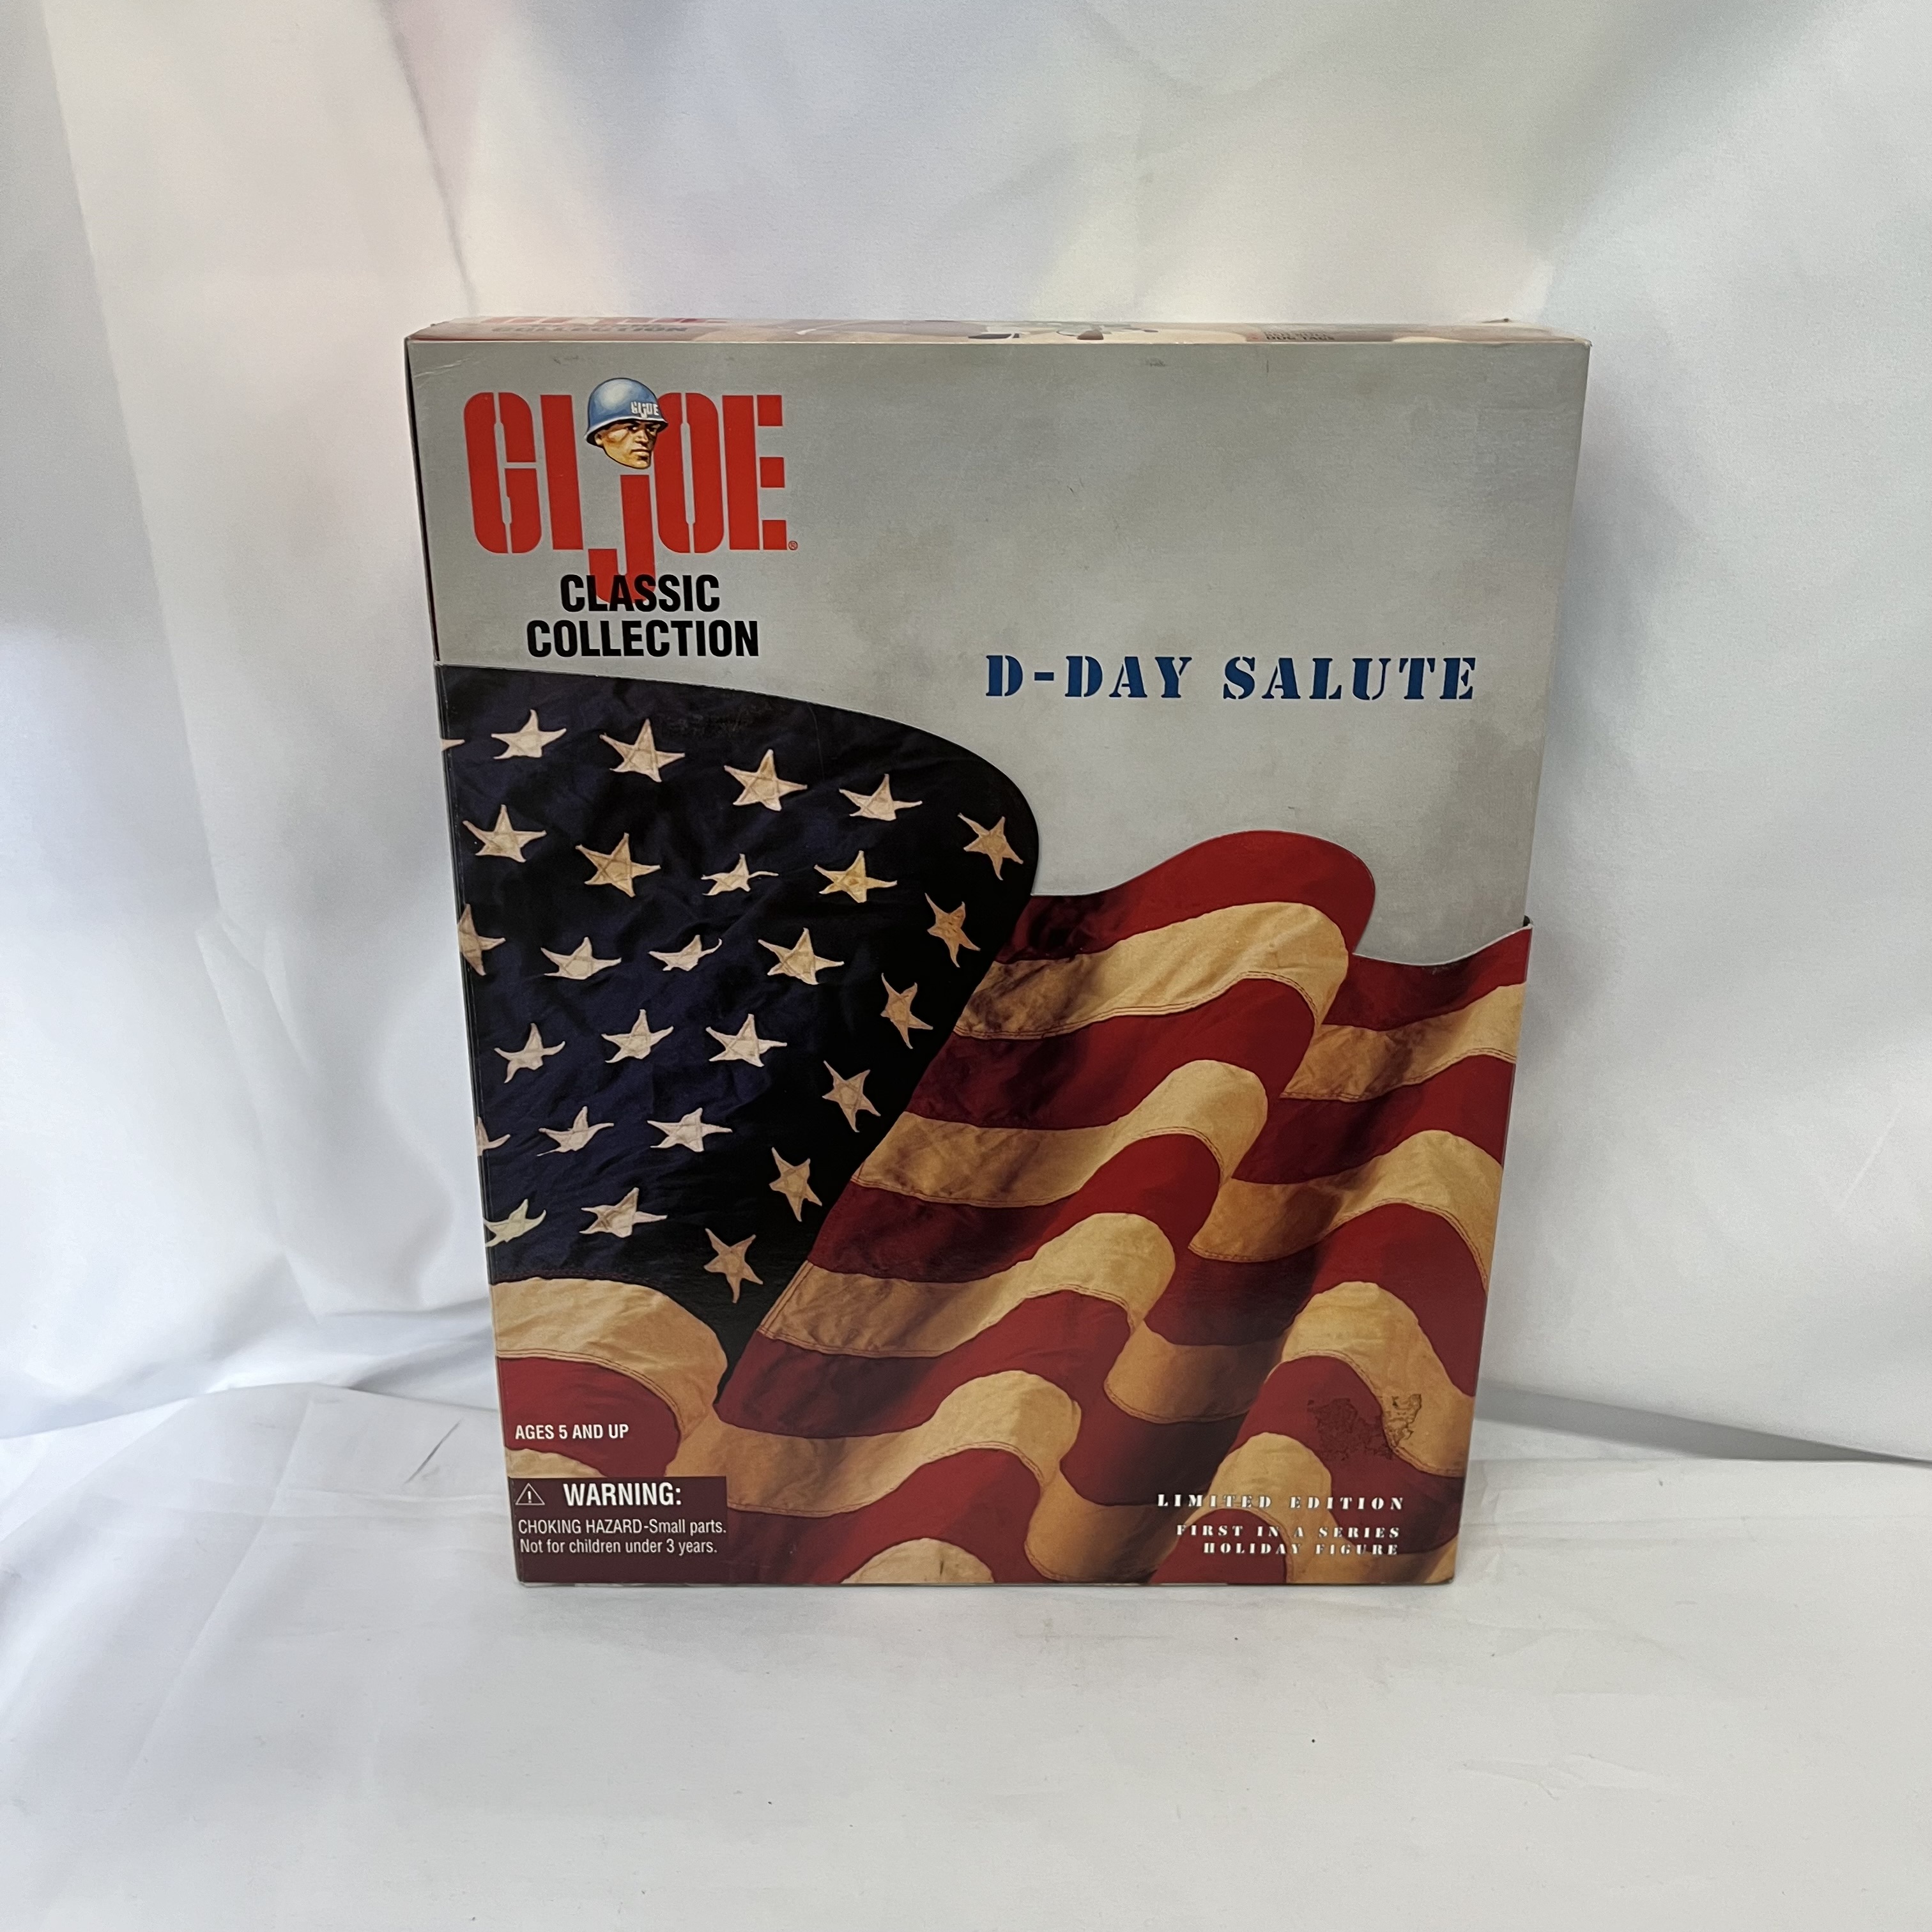 G.I. JOE CLASSIC COLLECTION D-Day Salute